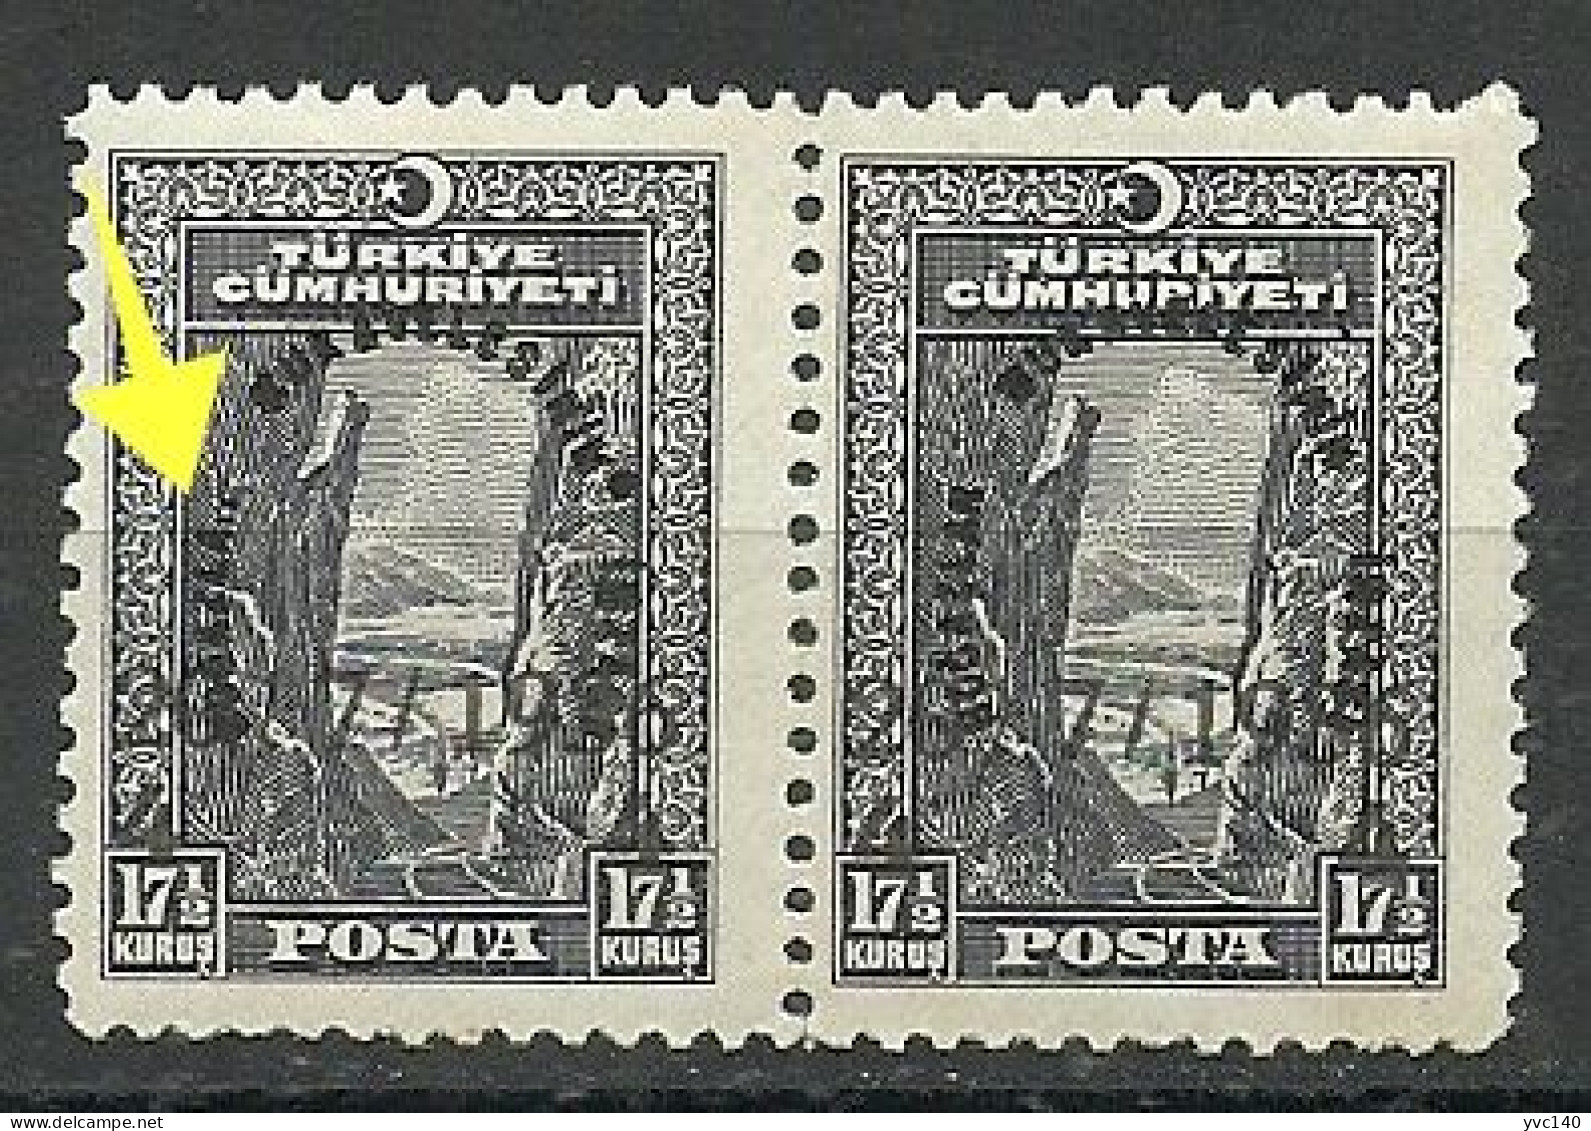 Turkey; 1936 Surcharged Stamp For The Signature Of The Straits Settlement "Untidy Surcharge" (Pair) - Unused Stamps